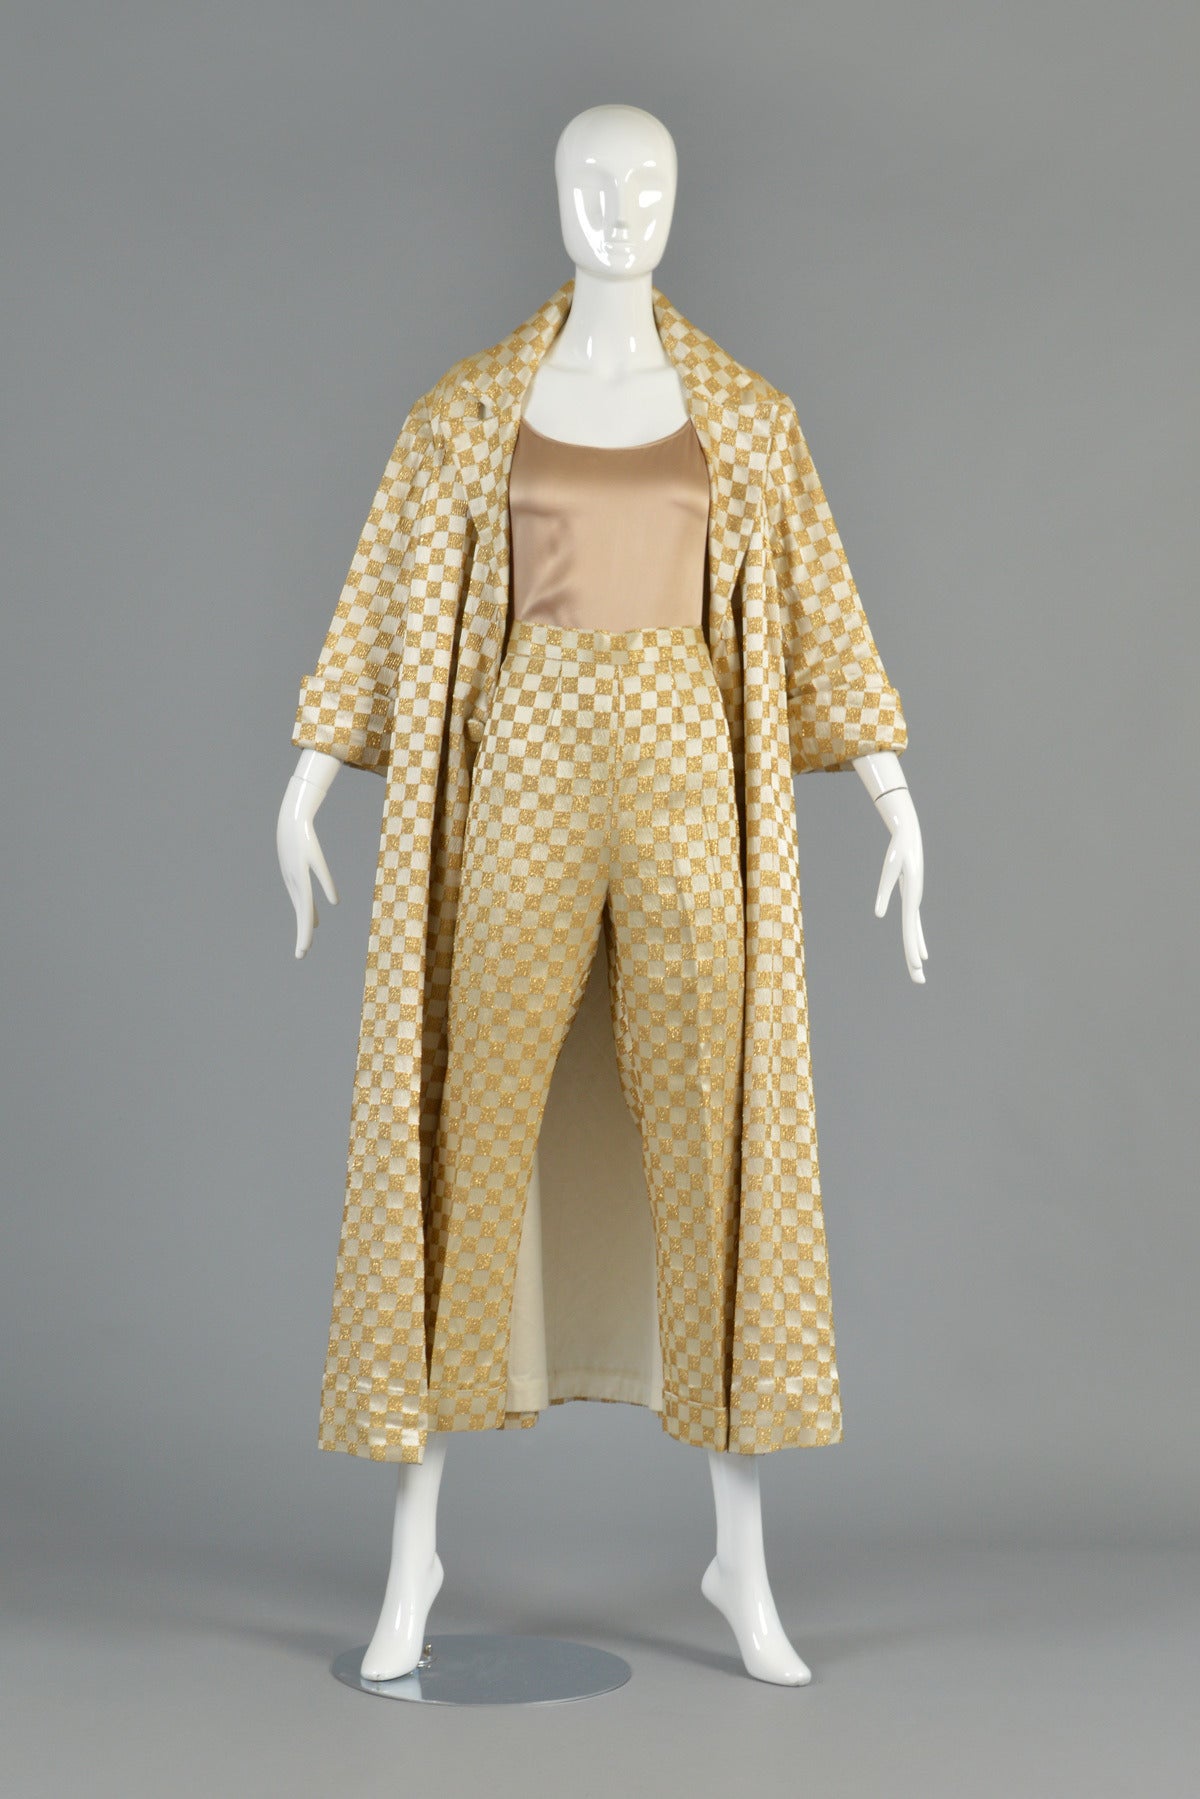 Recently reduced from $695 to $395

Seriously incredible 1960s ivory and gold checkerboard brocade ensemble. One-of-a-kind hand tailored find! Ultra high waisted, wide legged trousers with side zipper, wide legs and cuffed hem. Matching